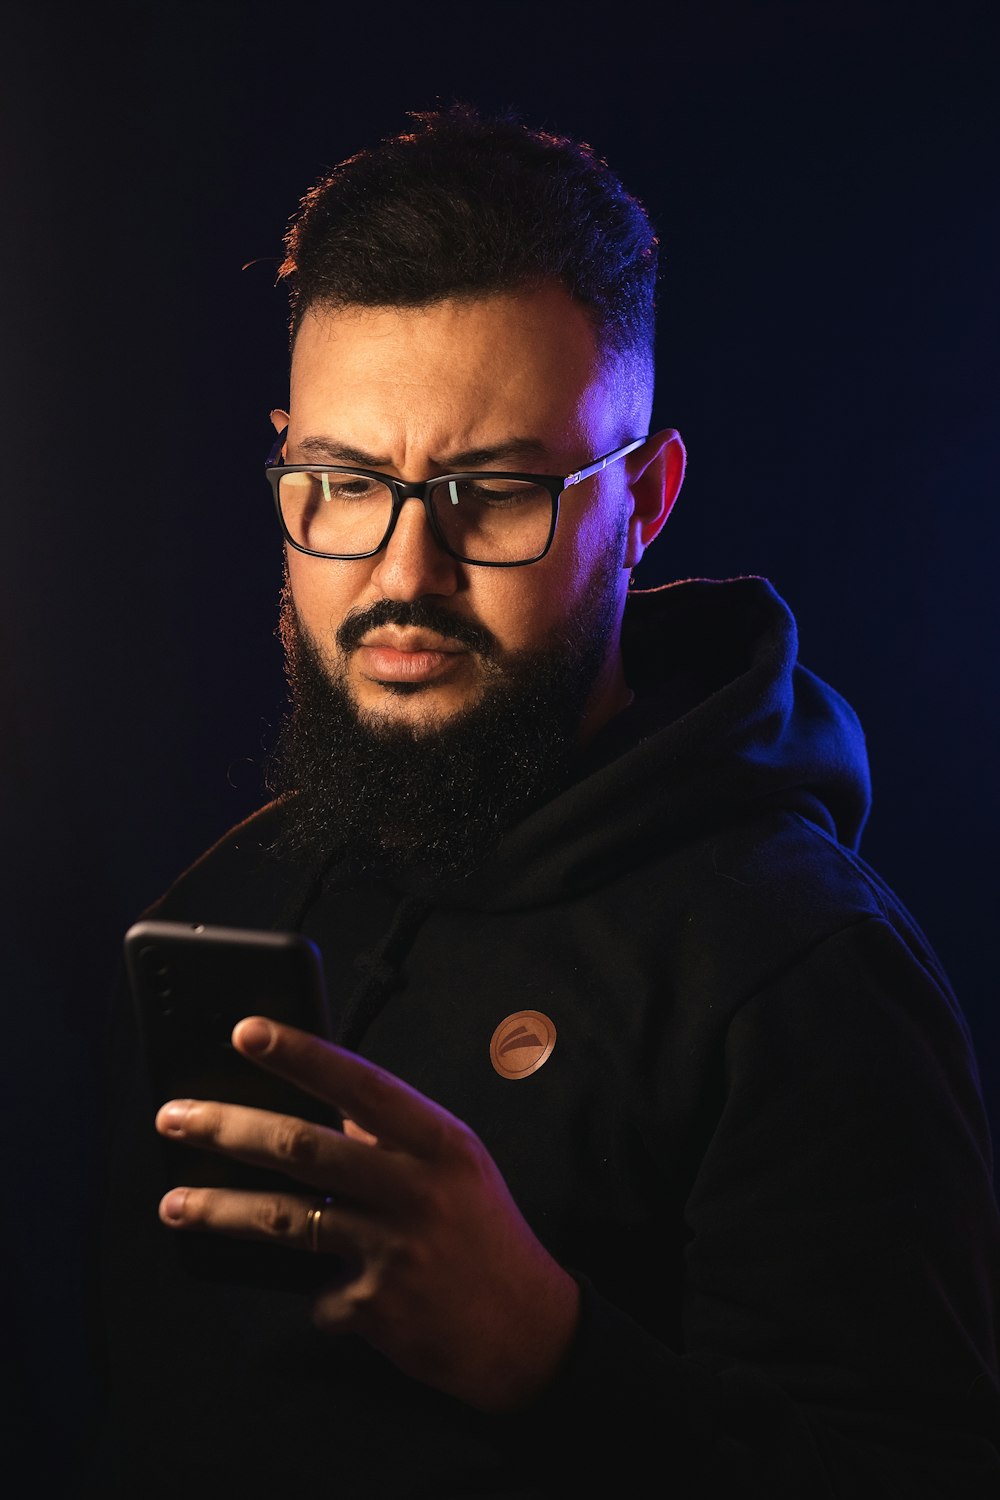 a man with a beard using a cell phone